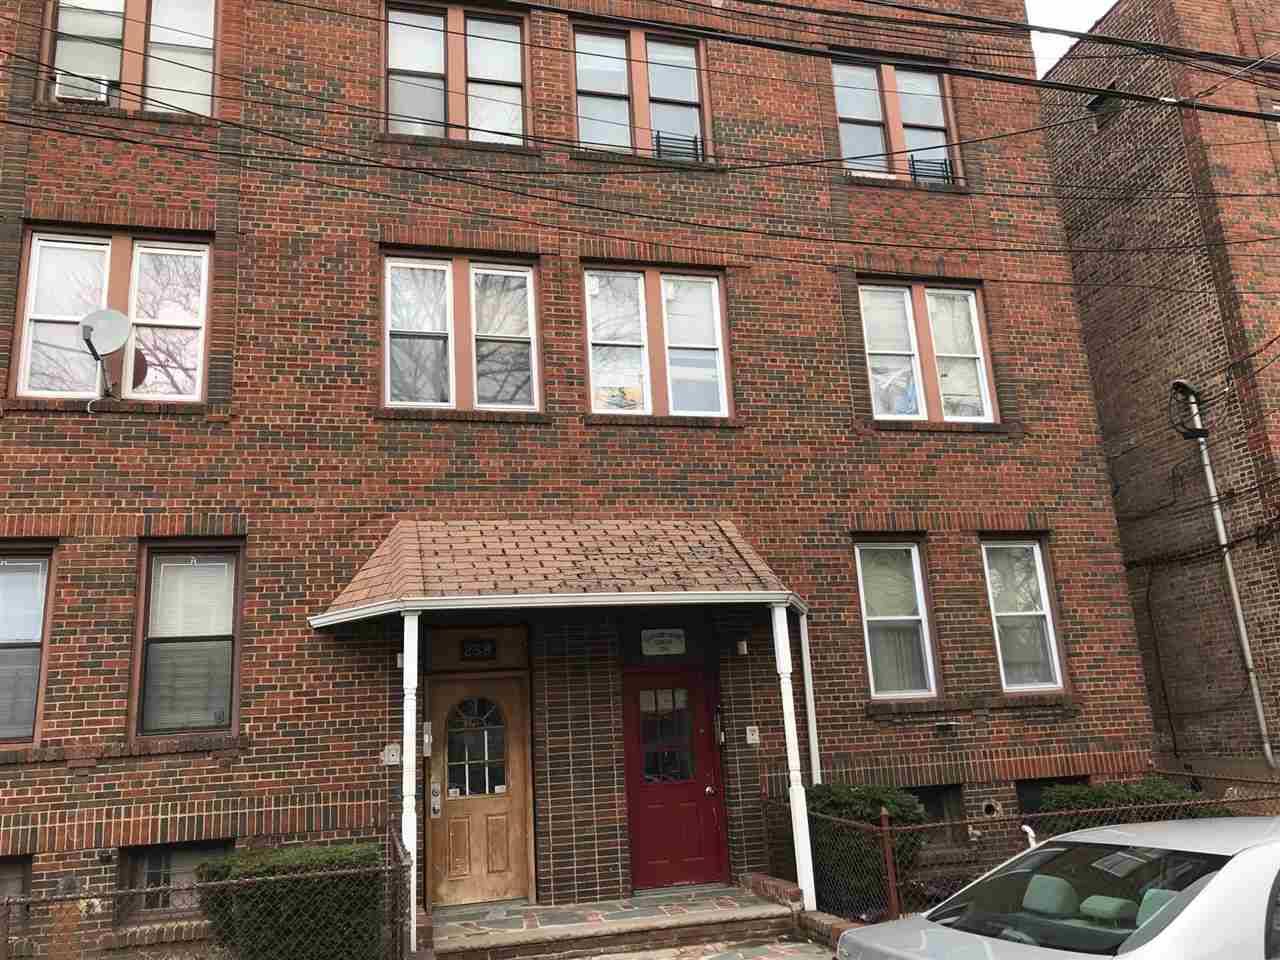 Move-in ready - 2 BR New Jersey